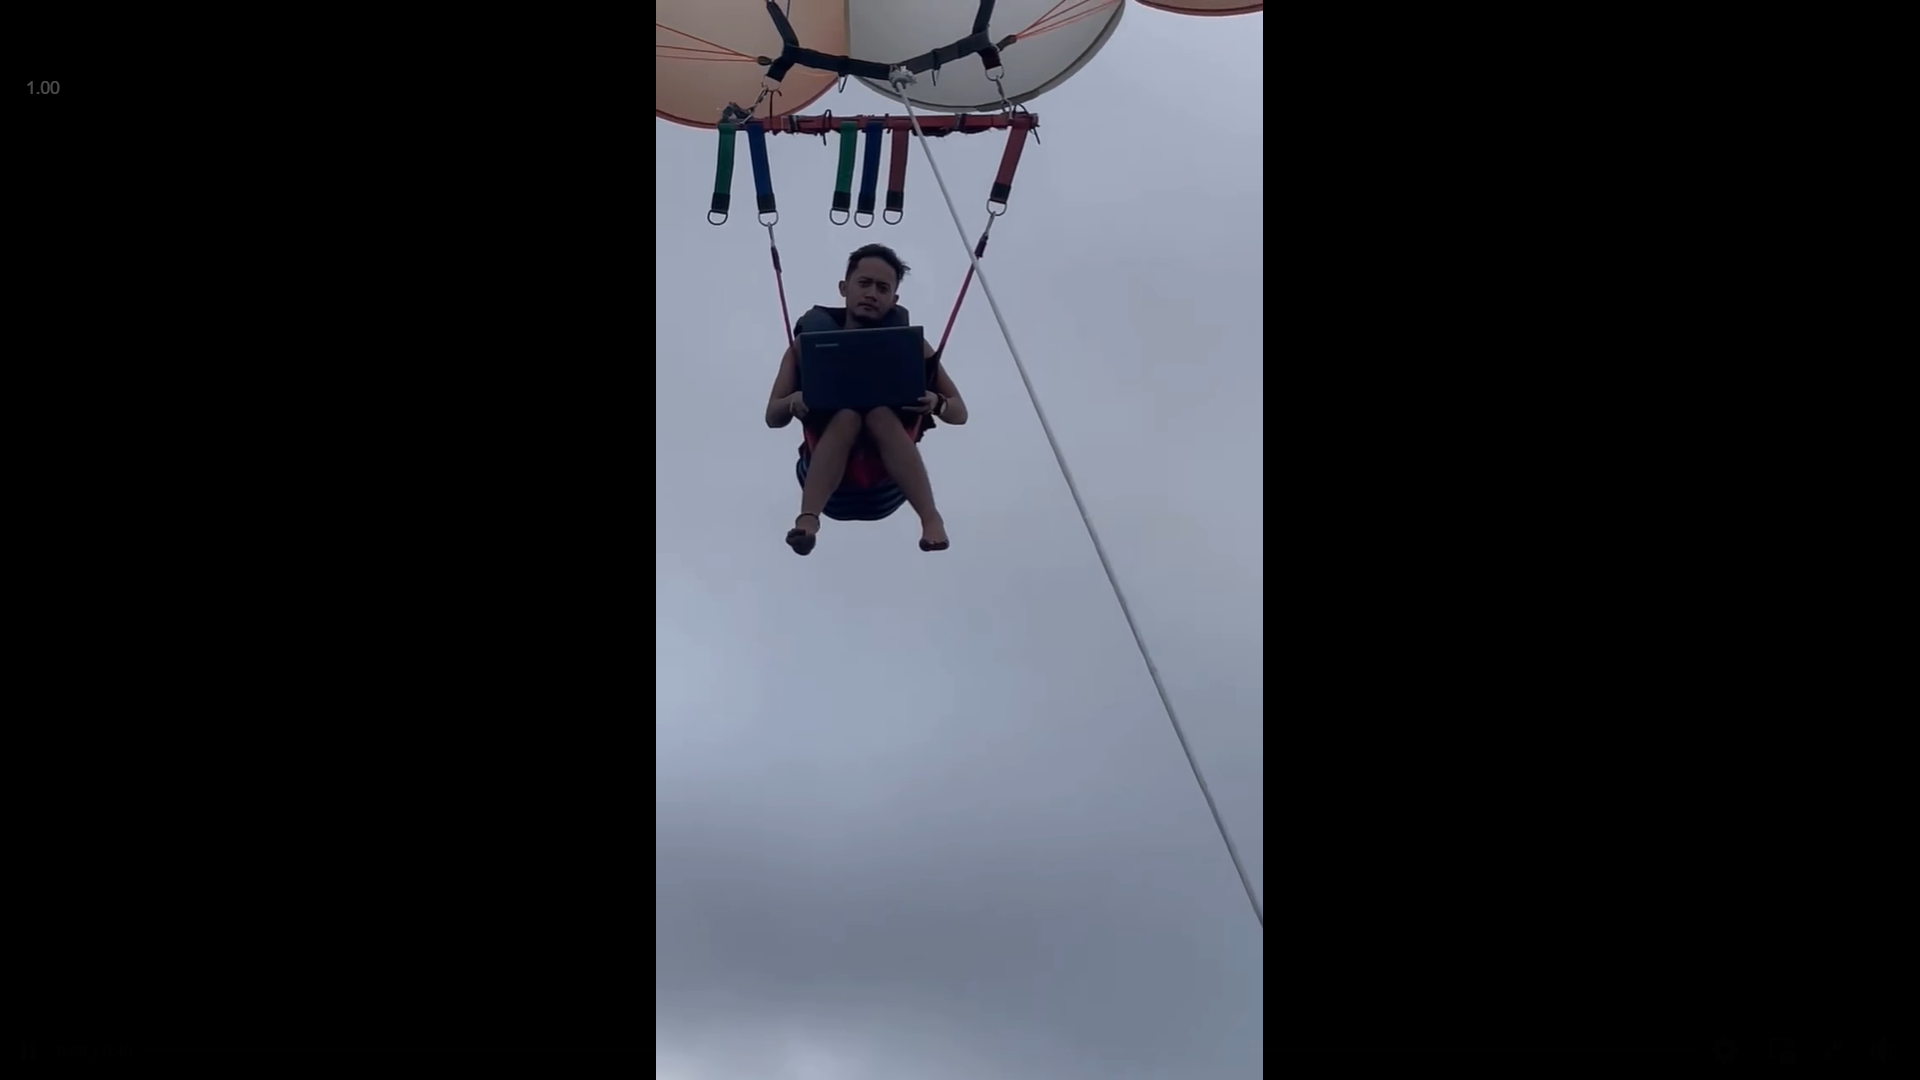 Filipino man sends out emails while parasailing in boracay, much to netizens' amusement